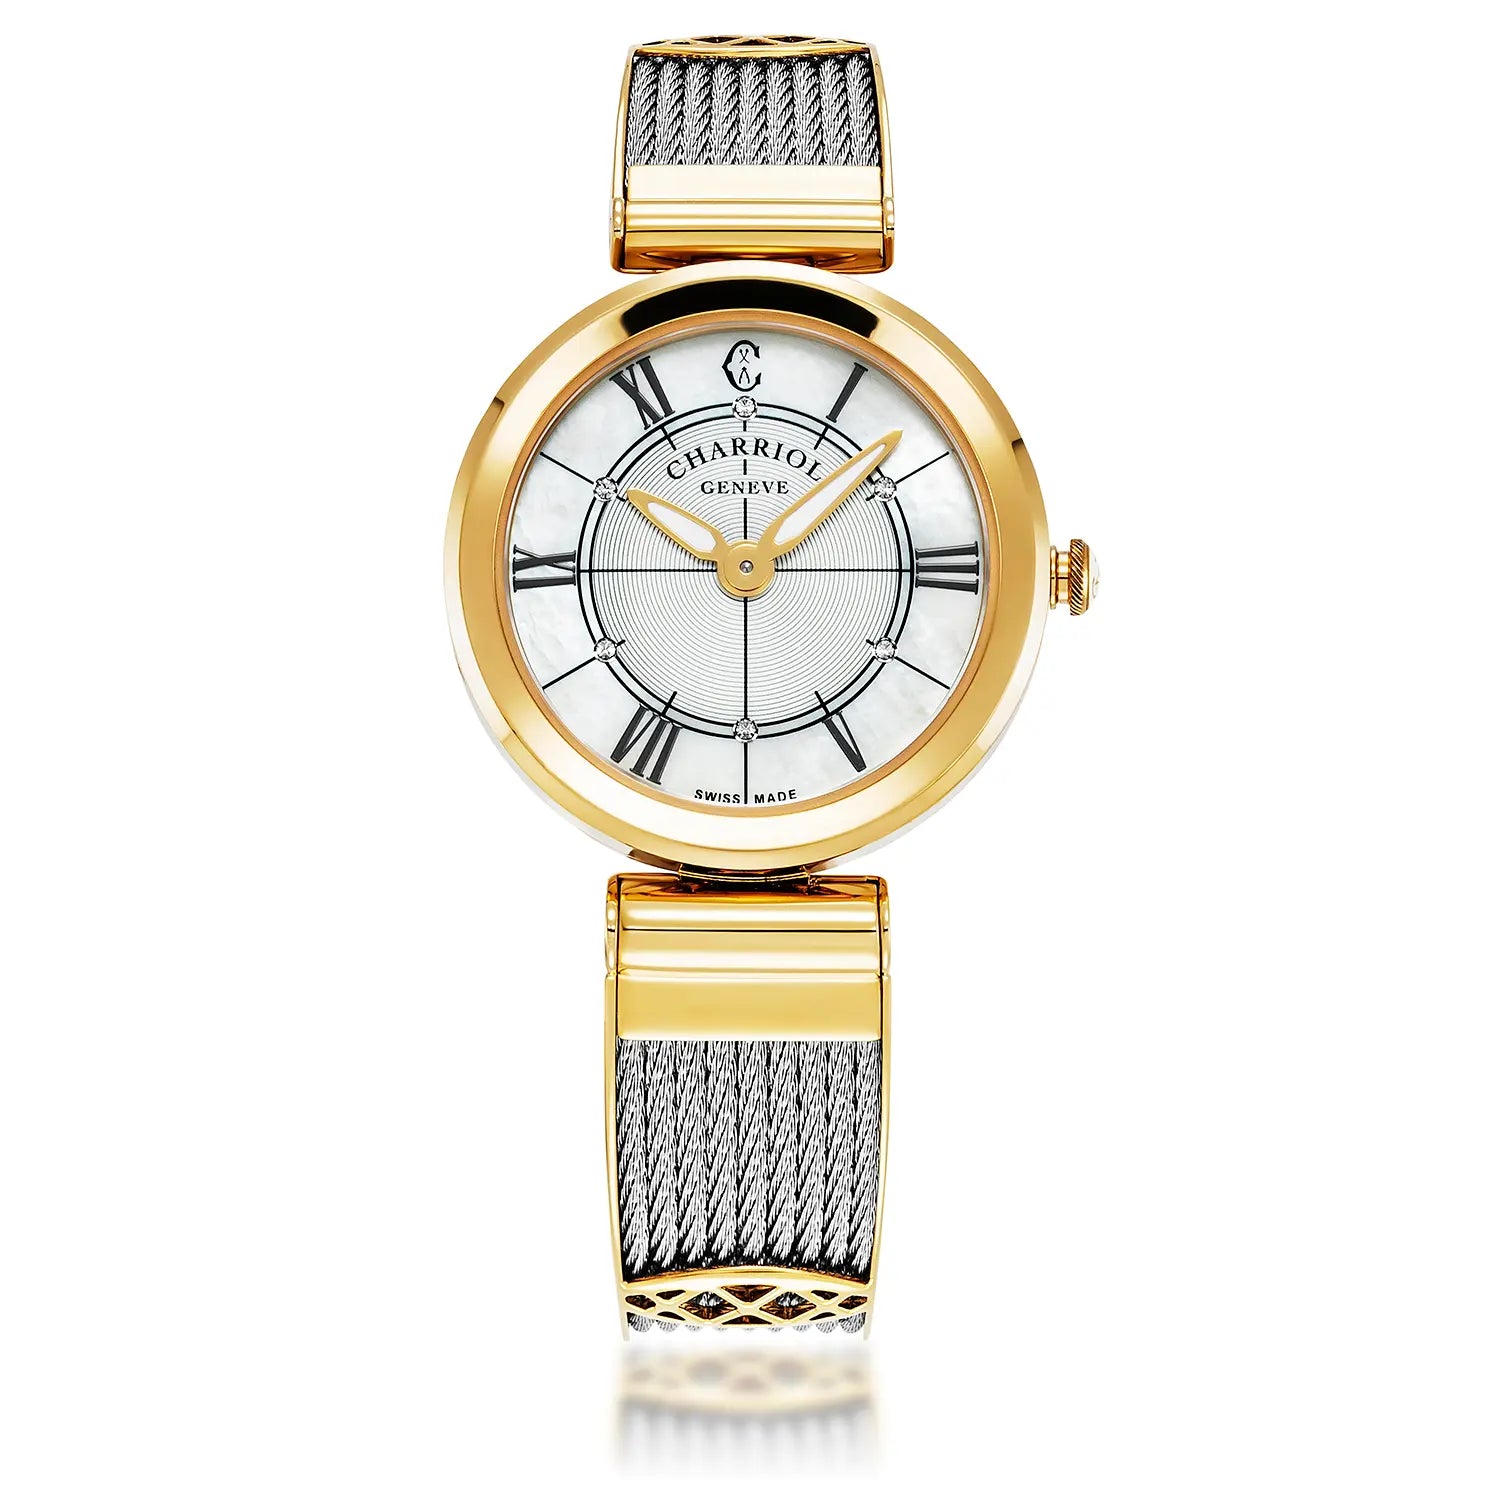 FOREVER, 32MM, QUARTZ CALIBRE, MOTHER-OF-PEARL DIAL, YELLOW GOLD PVD BEZEL, STEEL CABLE BRACELET - Charriol Geneve -  Watch